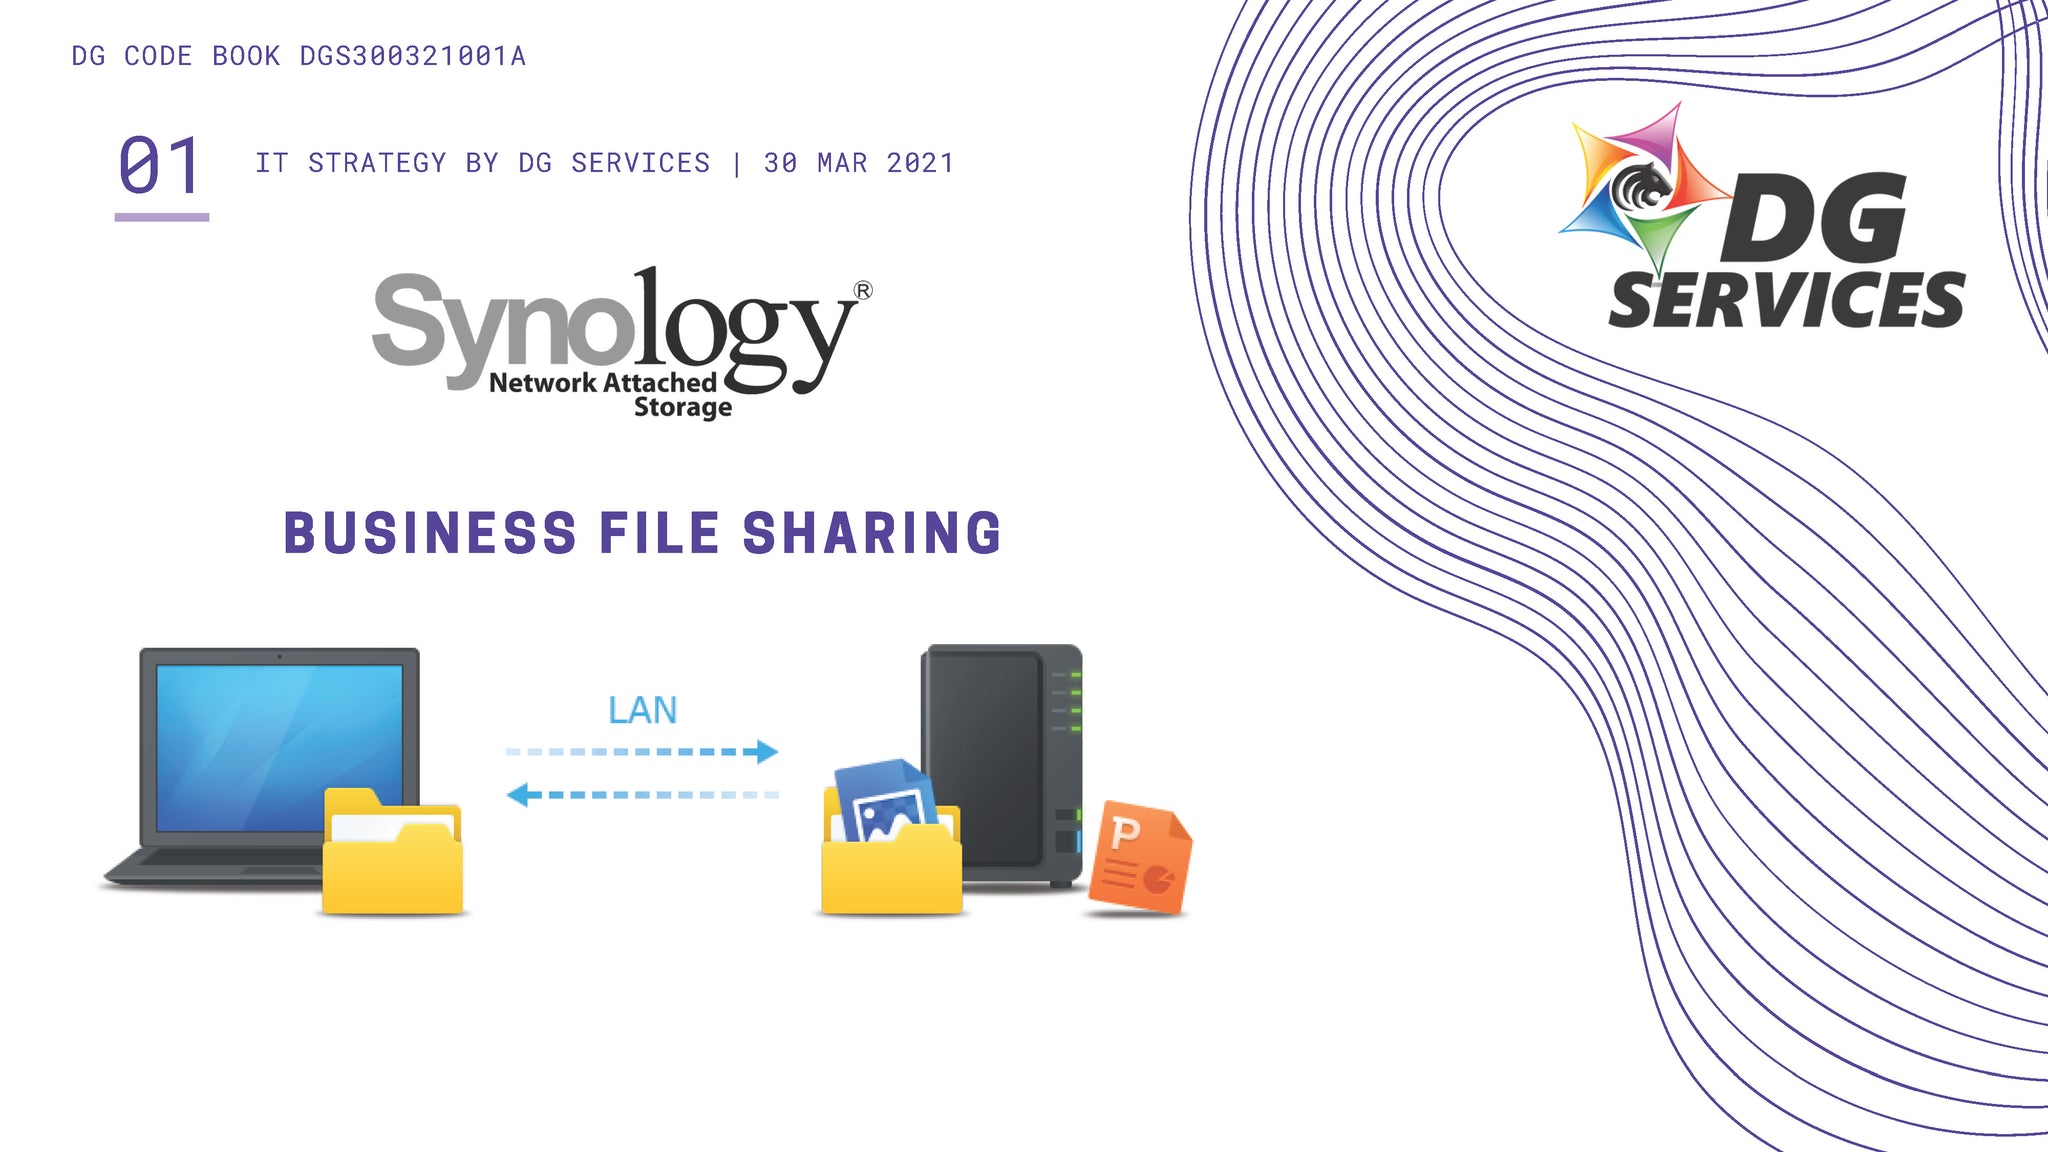 DGS - Synology Business File Sharing Ideas by DG Services